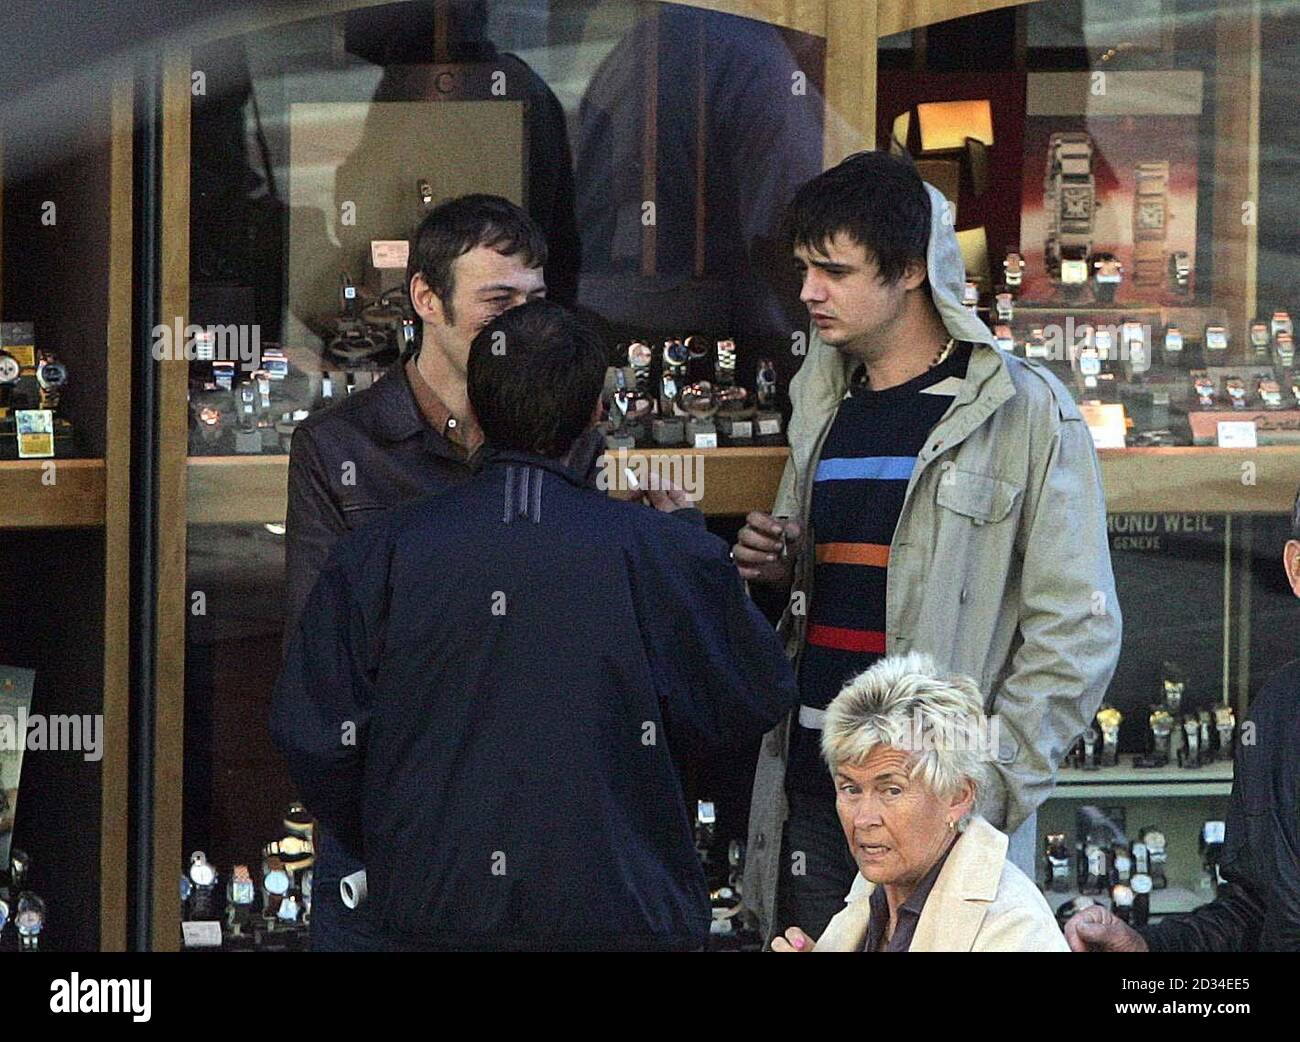 Babyshambles front man Pete Doherty (R) in Newcastle, Tuesday 27 September 2005, before his gig at Northumbria University tonight. PRESS ASSOCIATION Photo. Photo credit should read: Owen Humphreys/PA Stock Photo